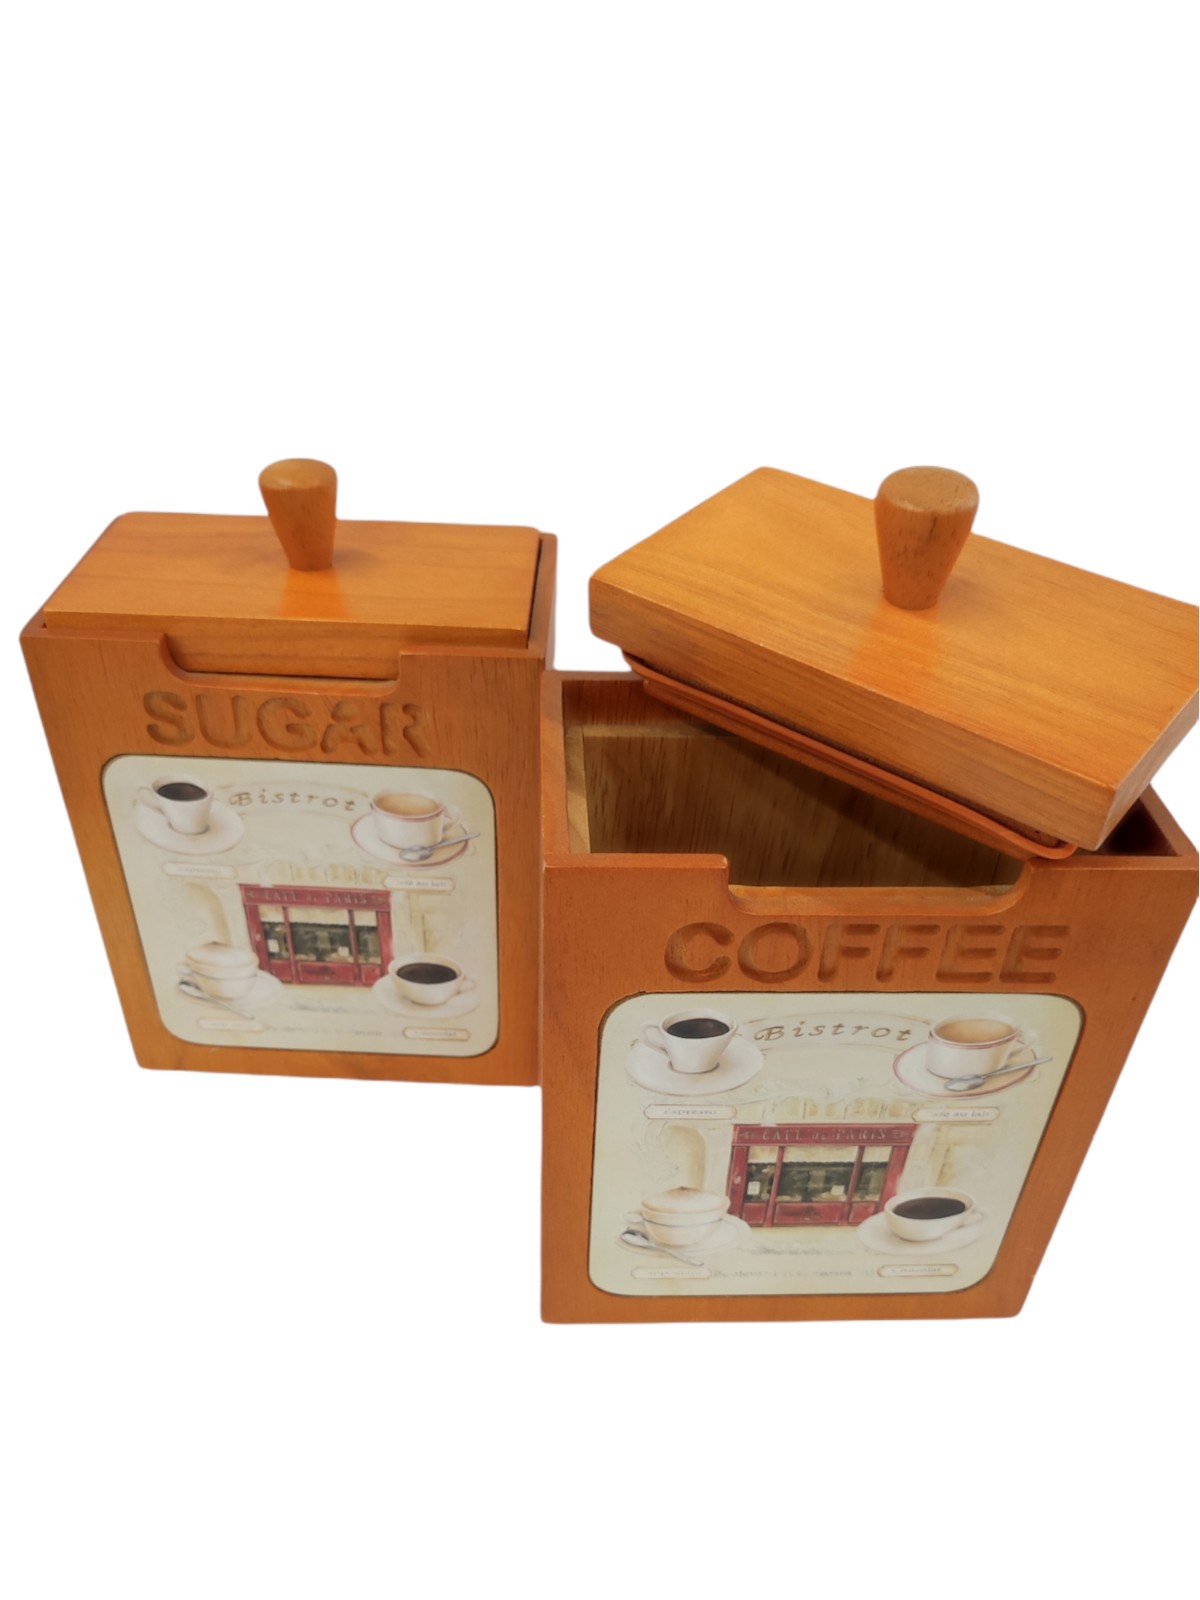 Wooden containers for cafe and sugar